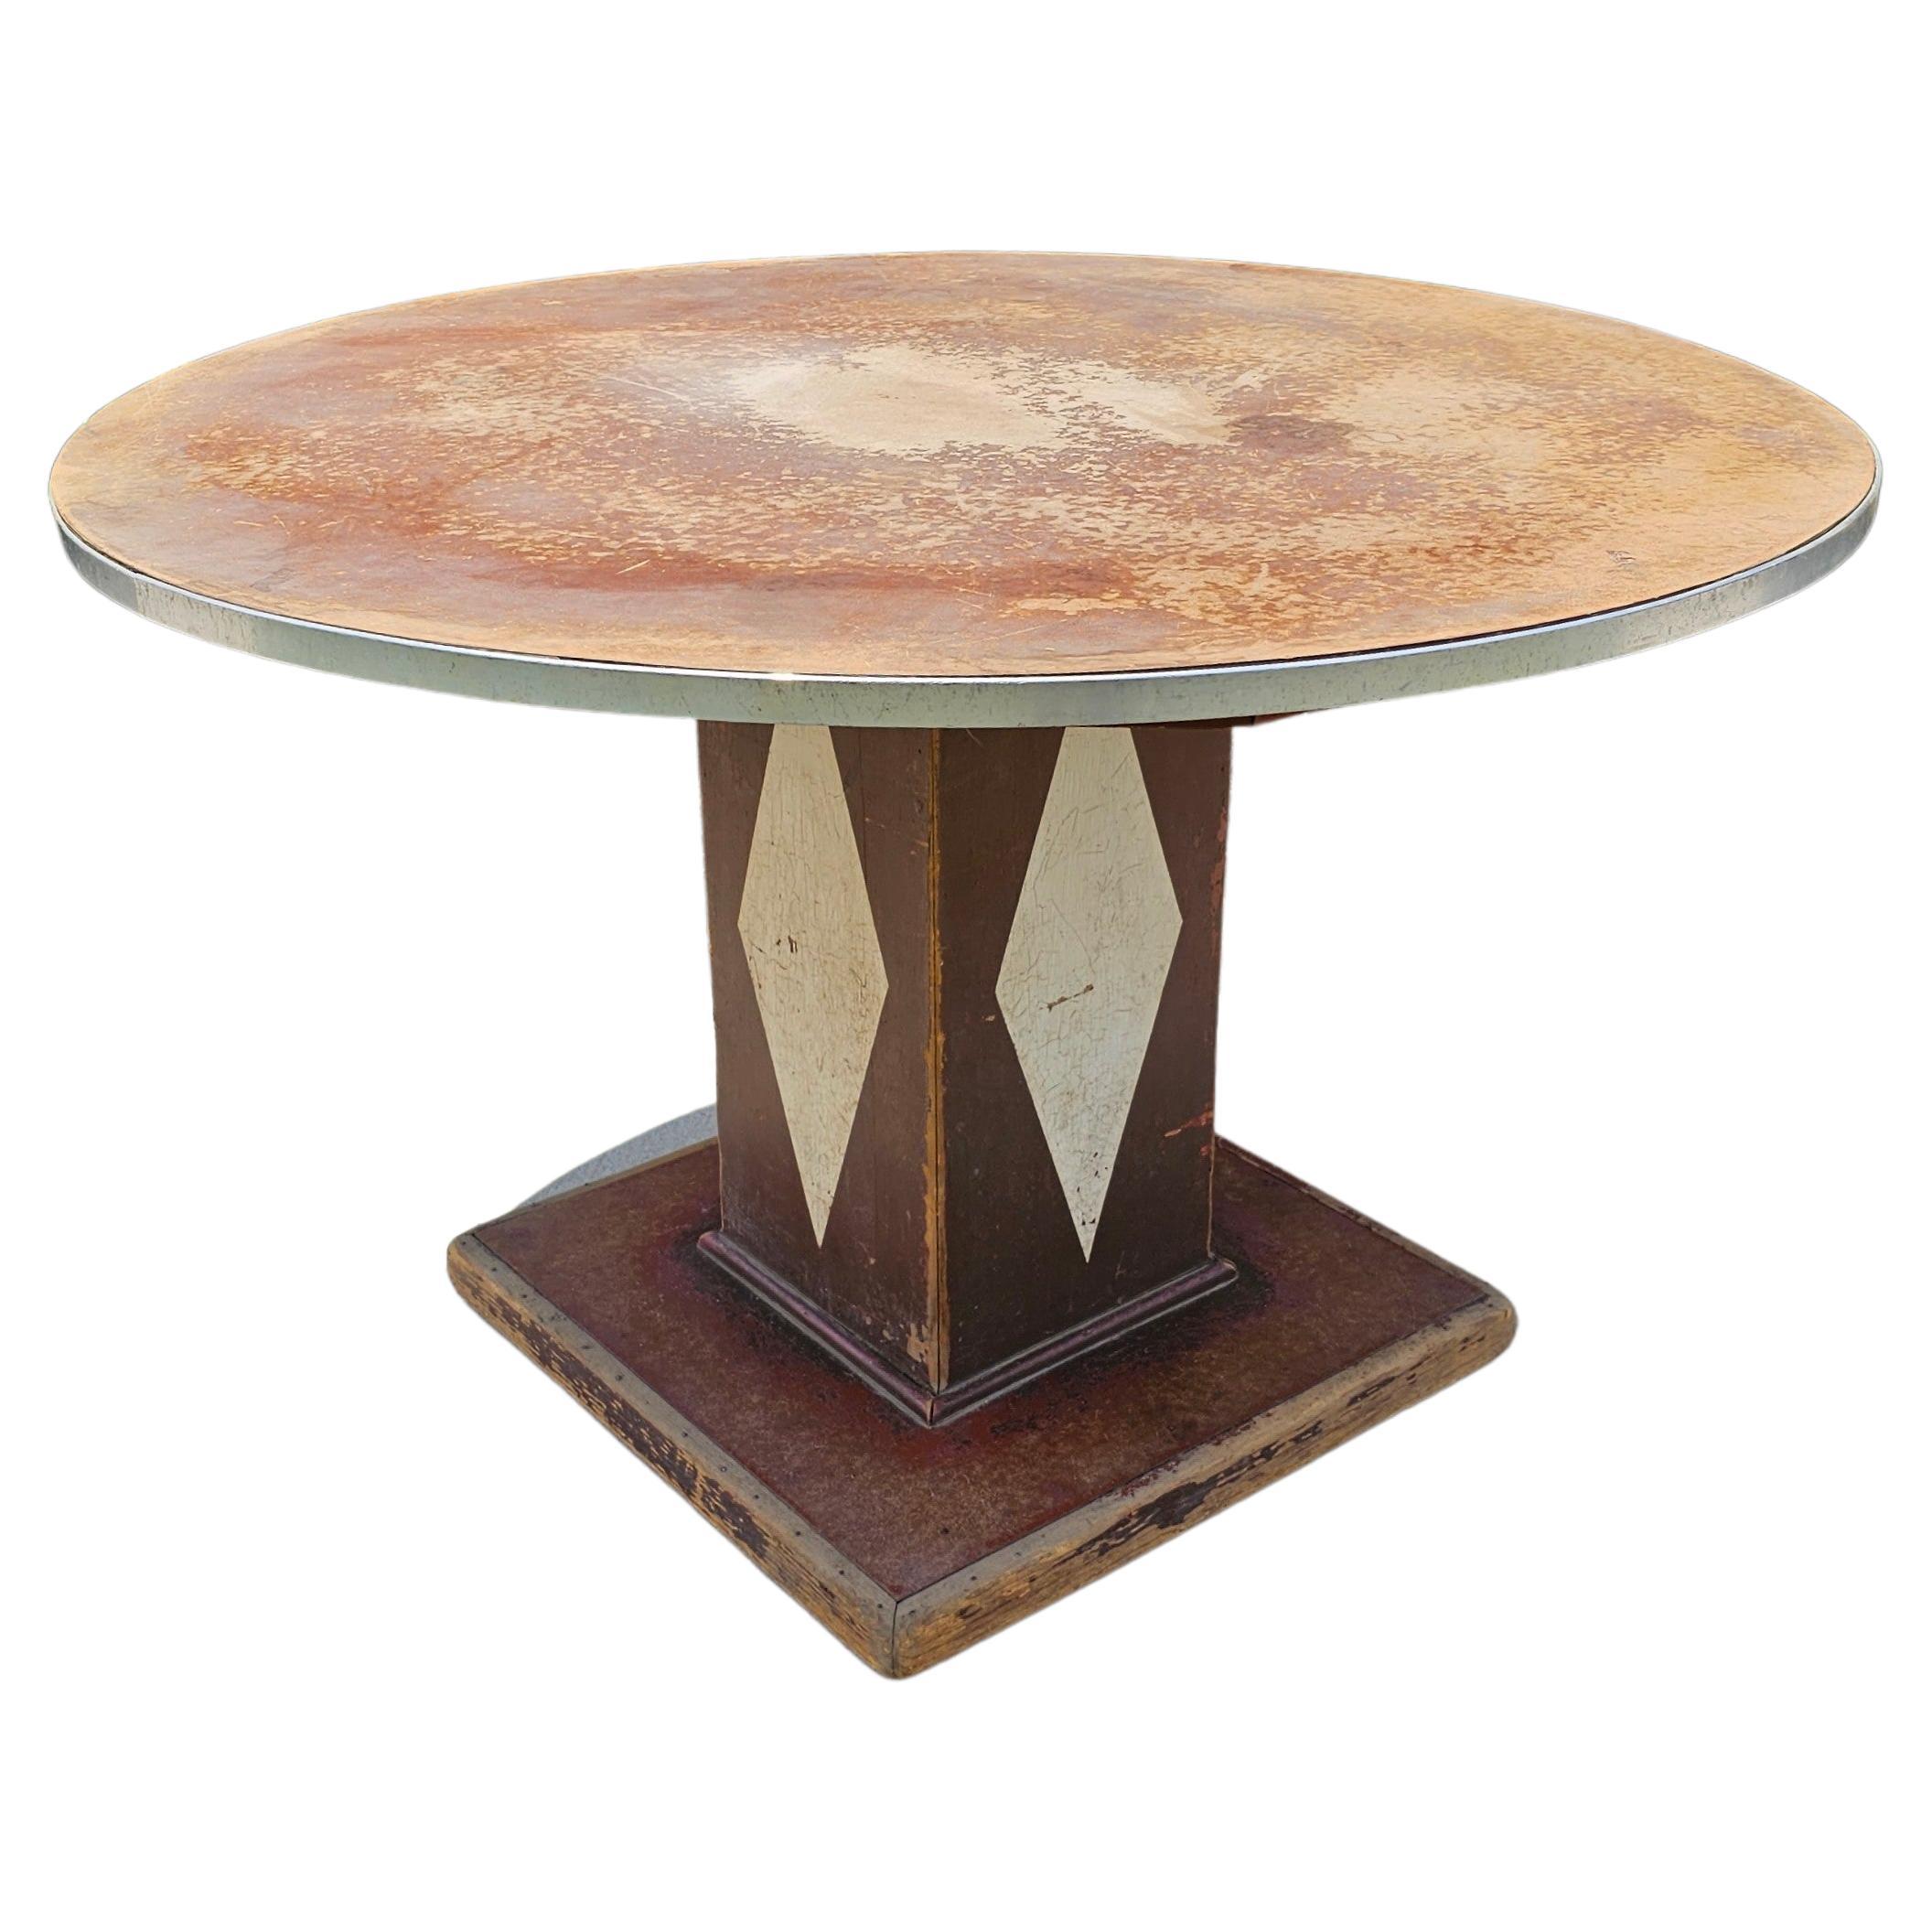 Industrial Art Deco Round Retail Store Display Table For Sale